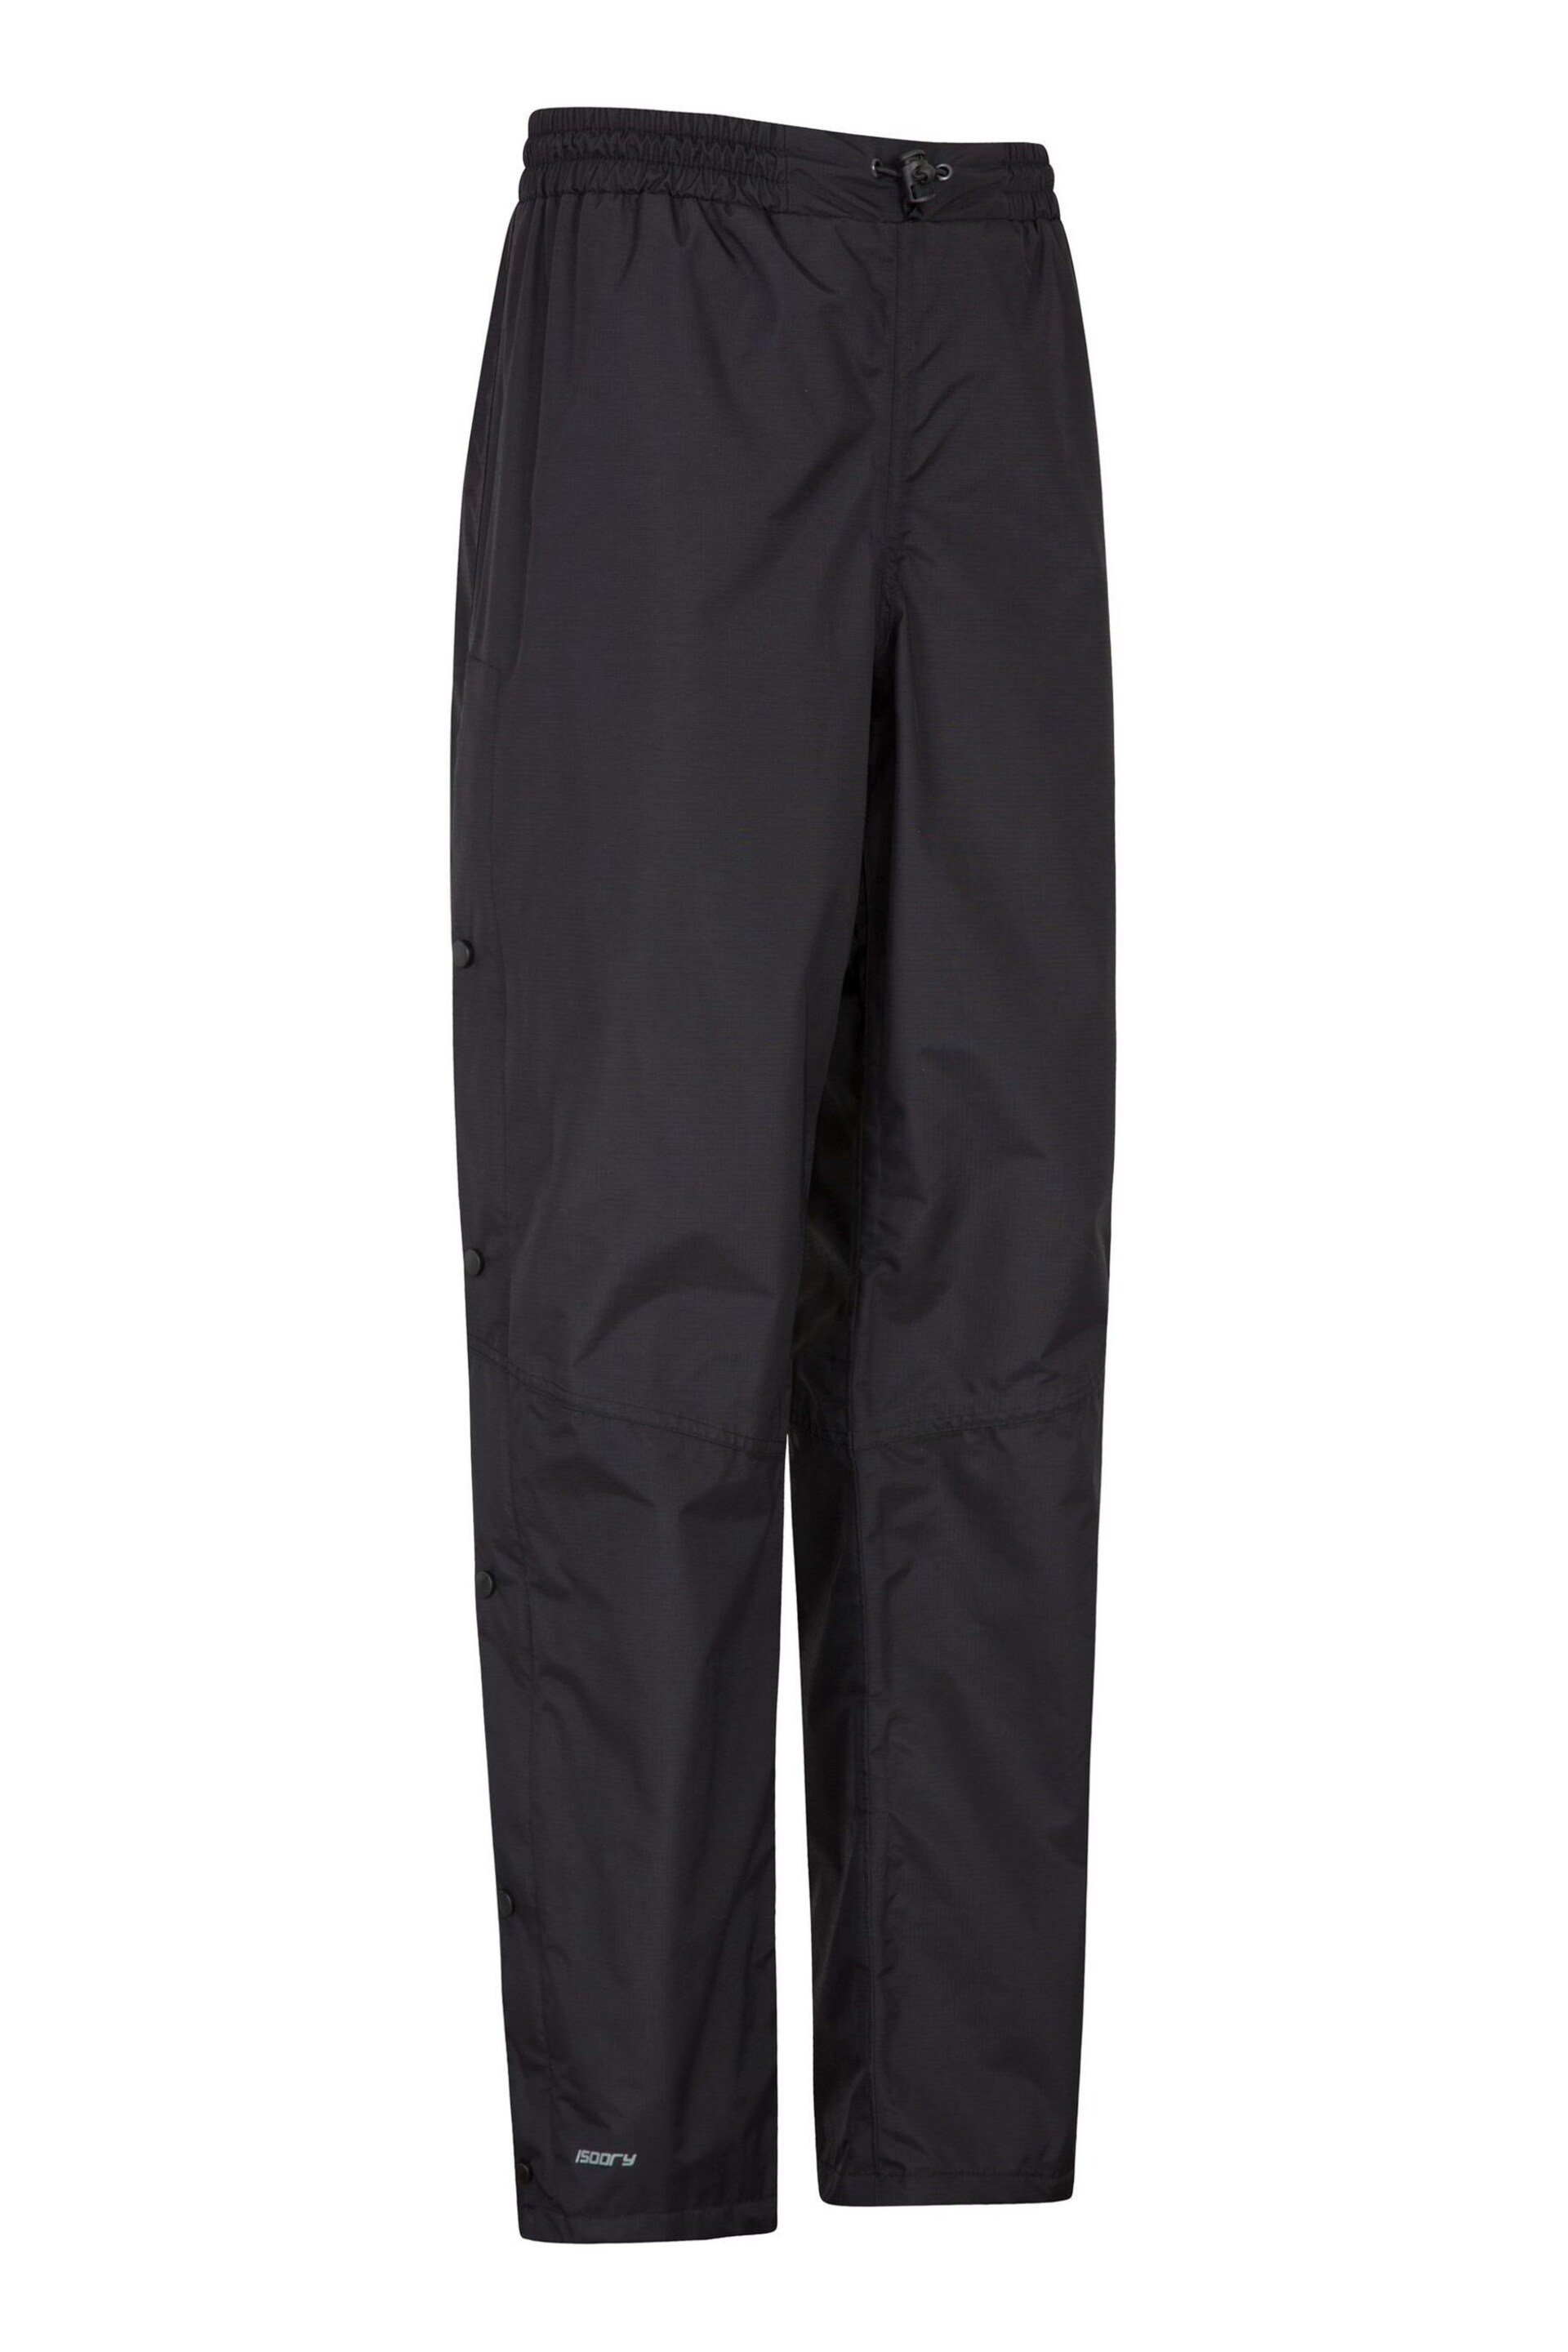 Mountain Warehouse Black Womens Downpour Short Length Waterproof Trousers - Image 2 of 5